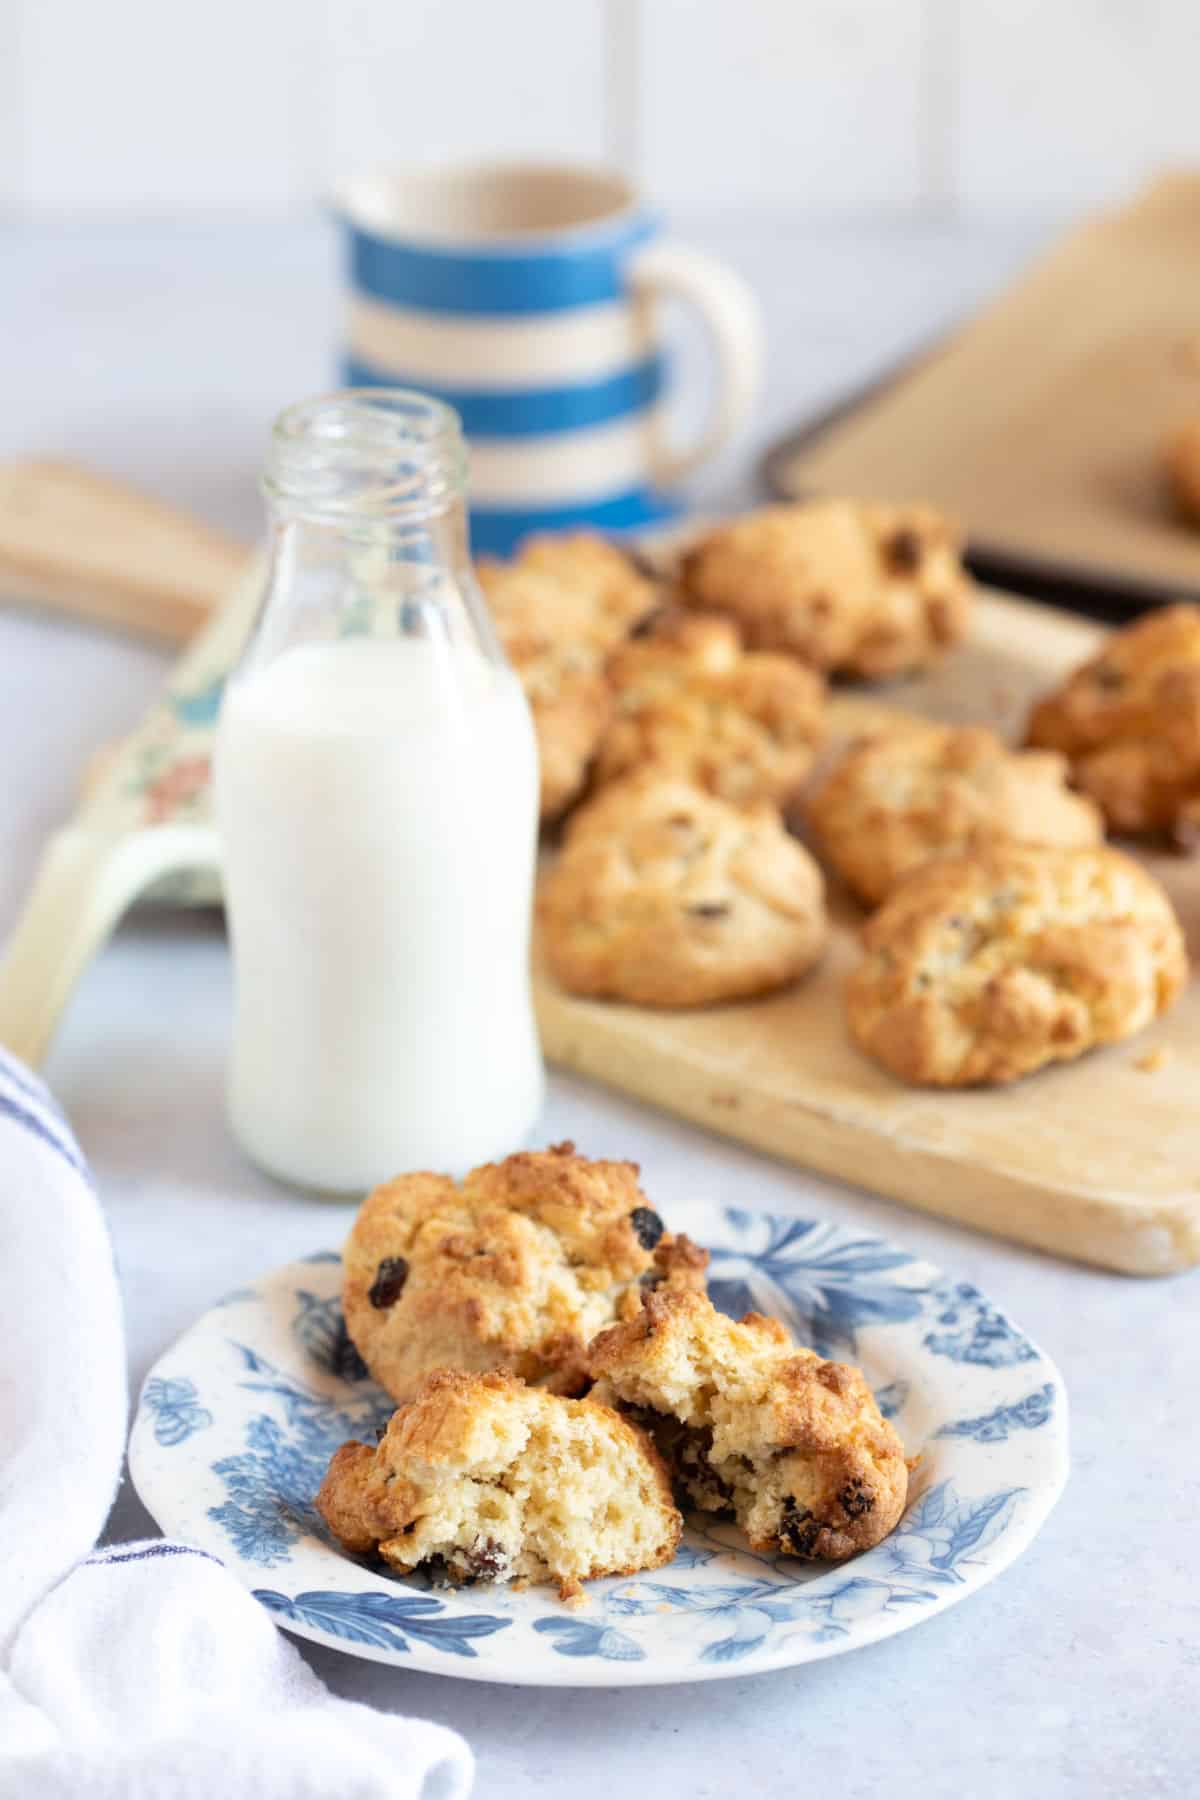 Rock buns on a plate with a glass of milk behind.